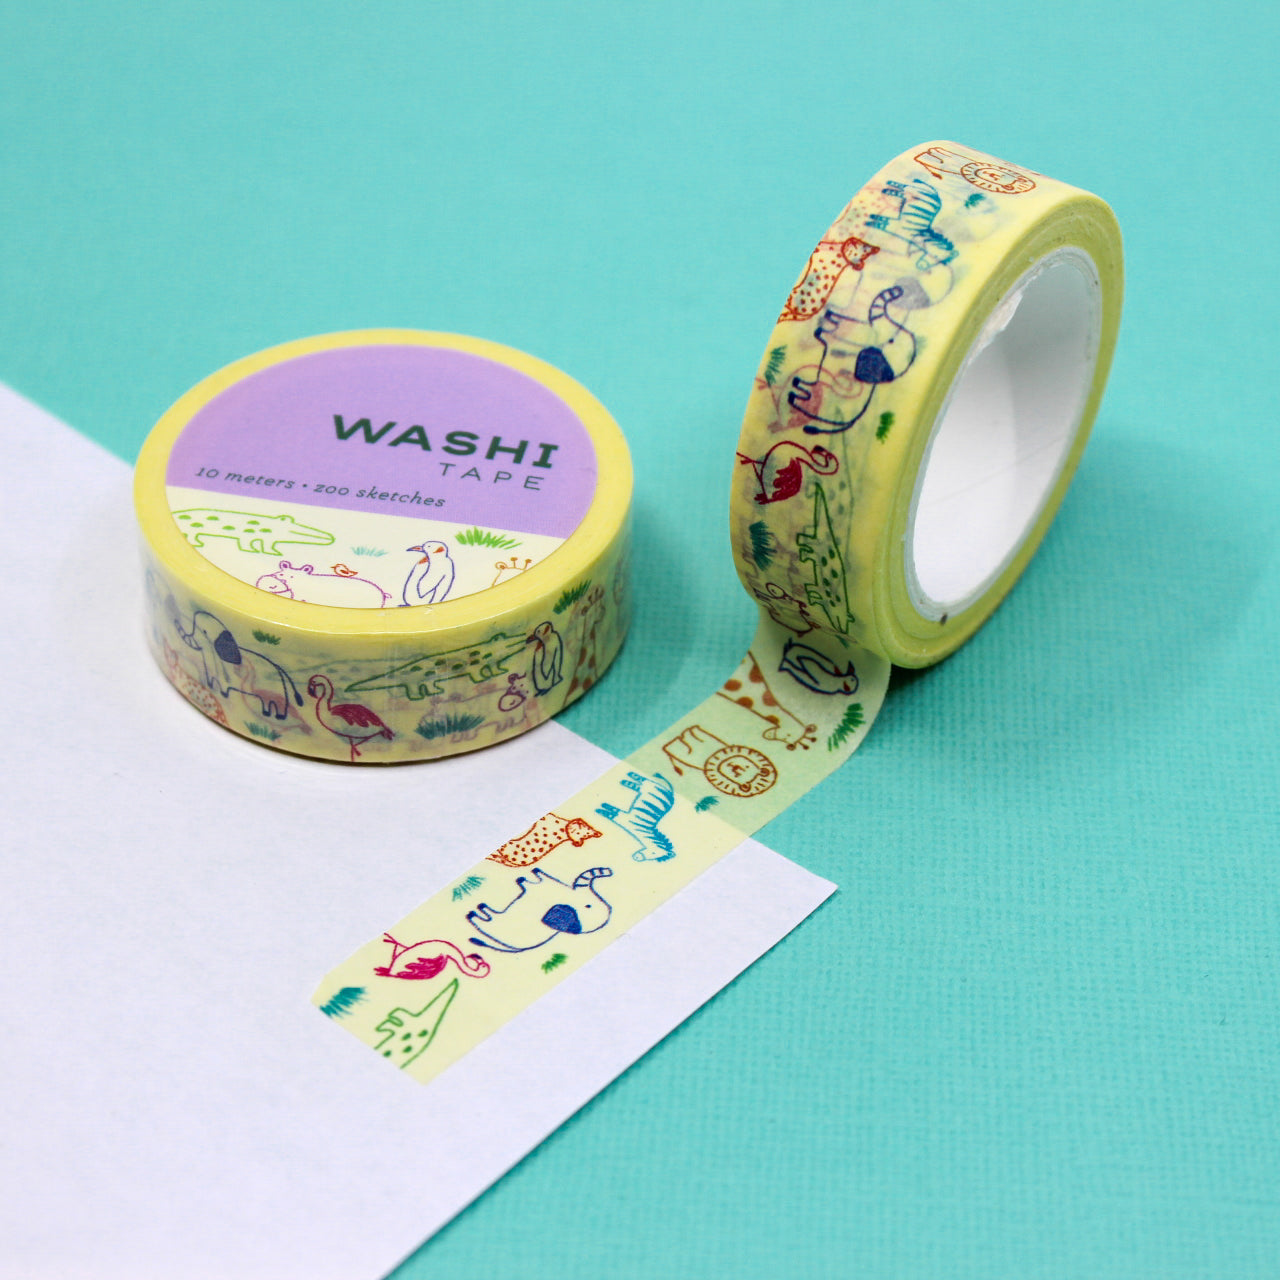 Unleash your creativity with our Zoo Animal Sketches Washi Tape, adorned with charming sketches of zoo animals. Perfect for adding a touch of the wild to your projects. This tape is from Girl of All Work and sold at BBB Supplies Craft Shop.